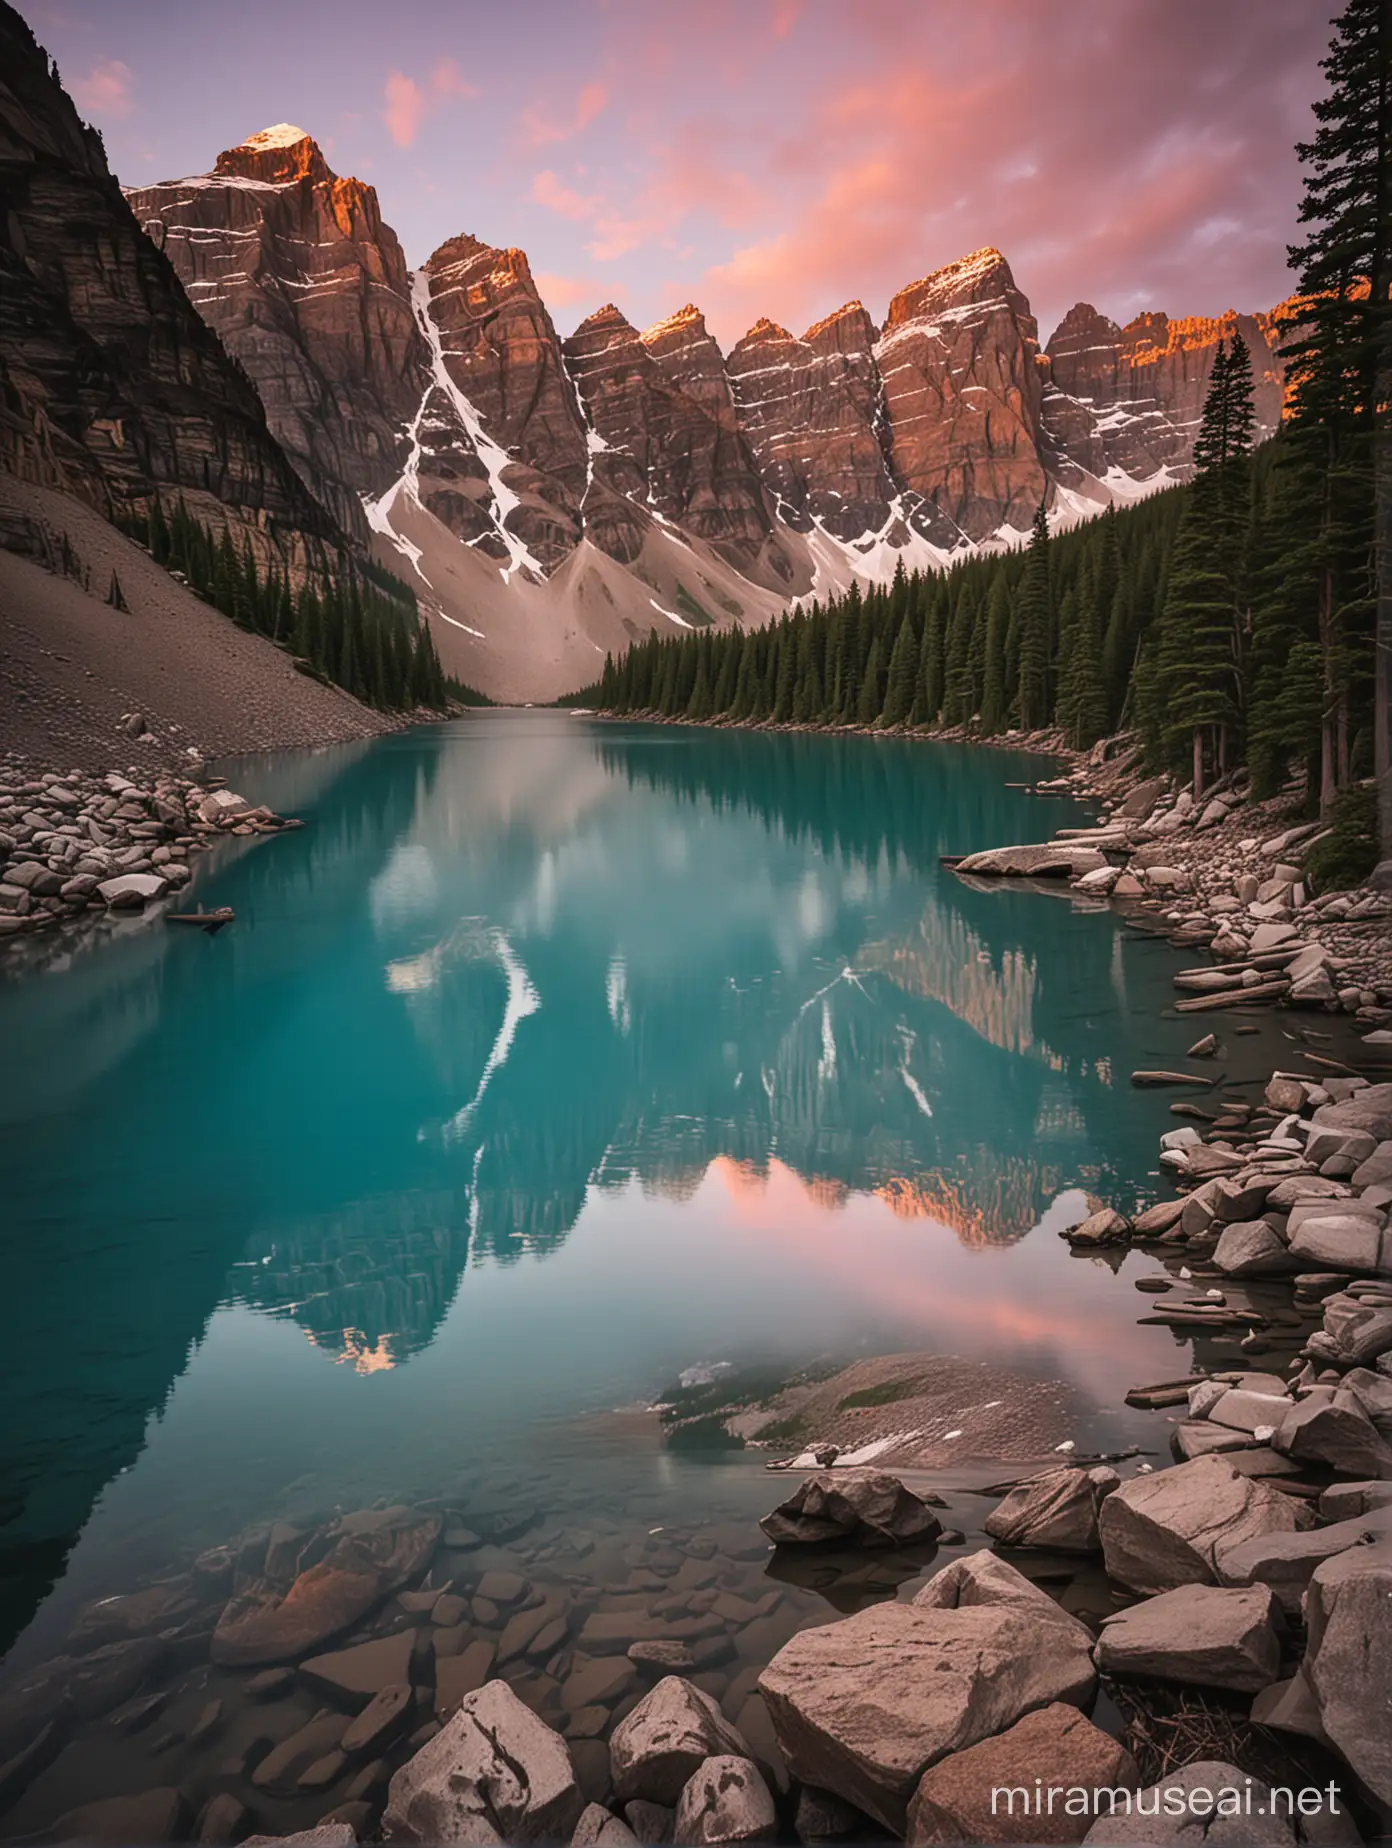 Sunset Serenity at Moraine Lake with Nostalgic Charm and Vibrant Hues